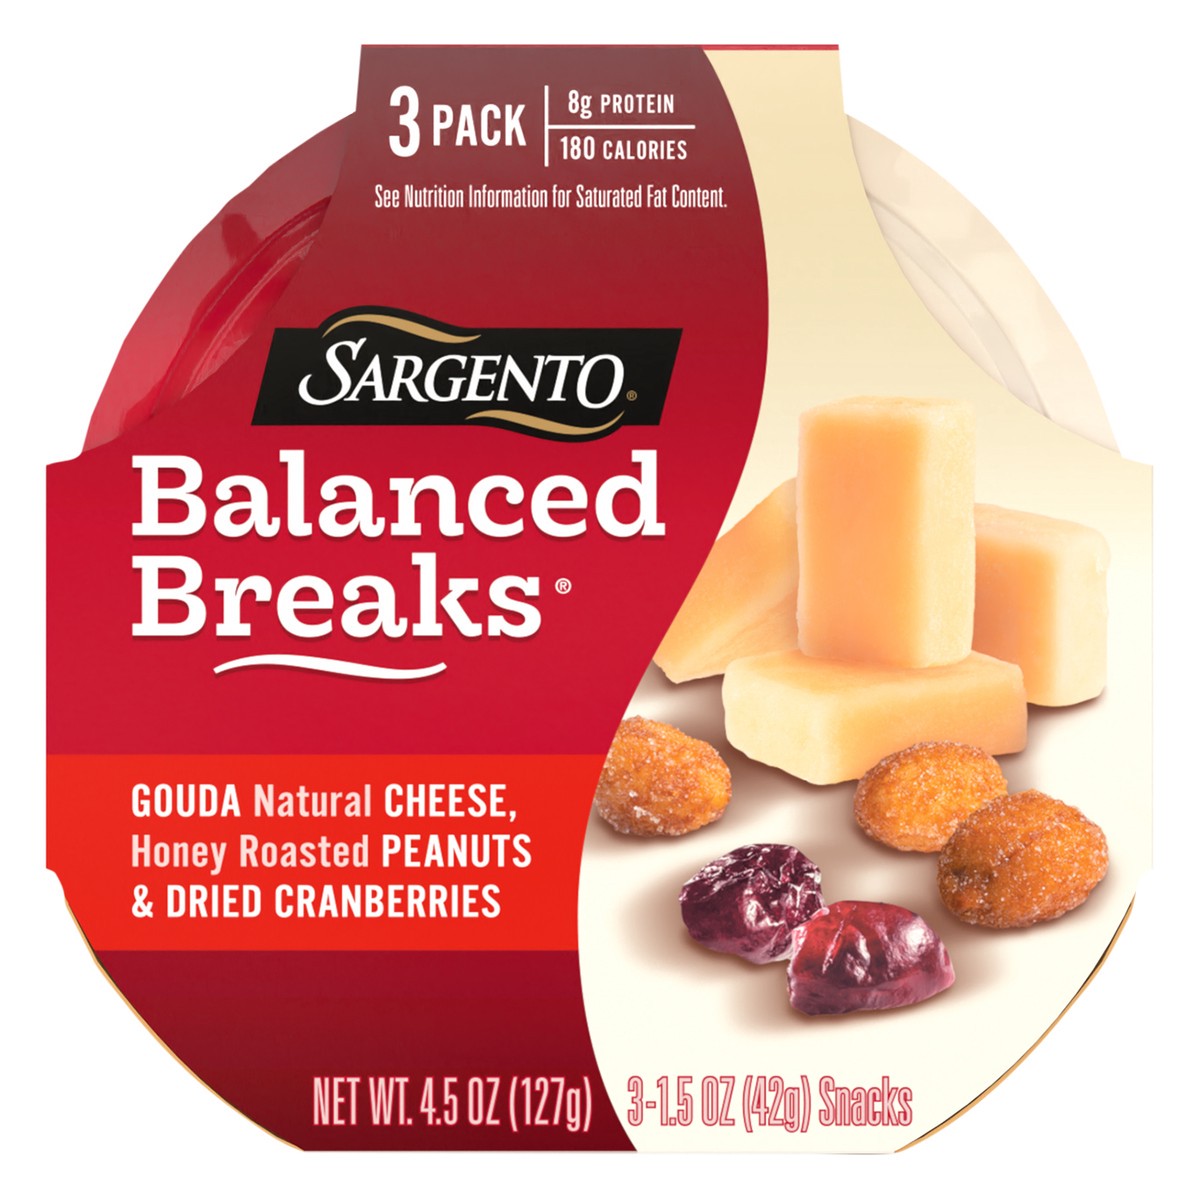 slide 1 of 9, Sargento Balanced Breaks with Gouda Natural Cheese, Honey Roasted Peanuts and Dried Cranberries, 1.5 oz., 3-Pack, 3 ct; 1.5 oz